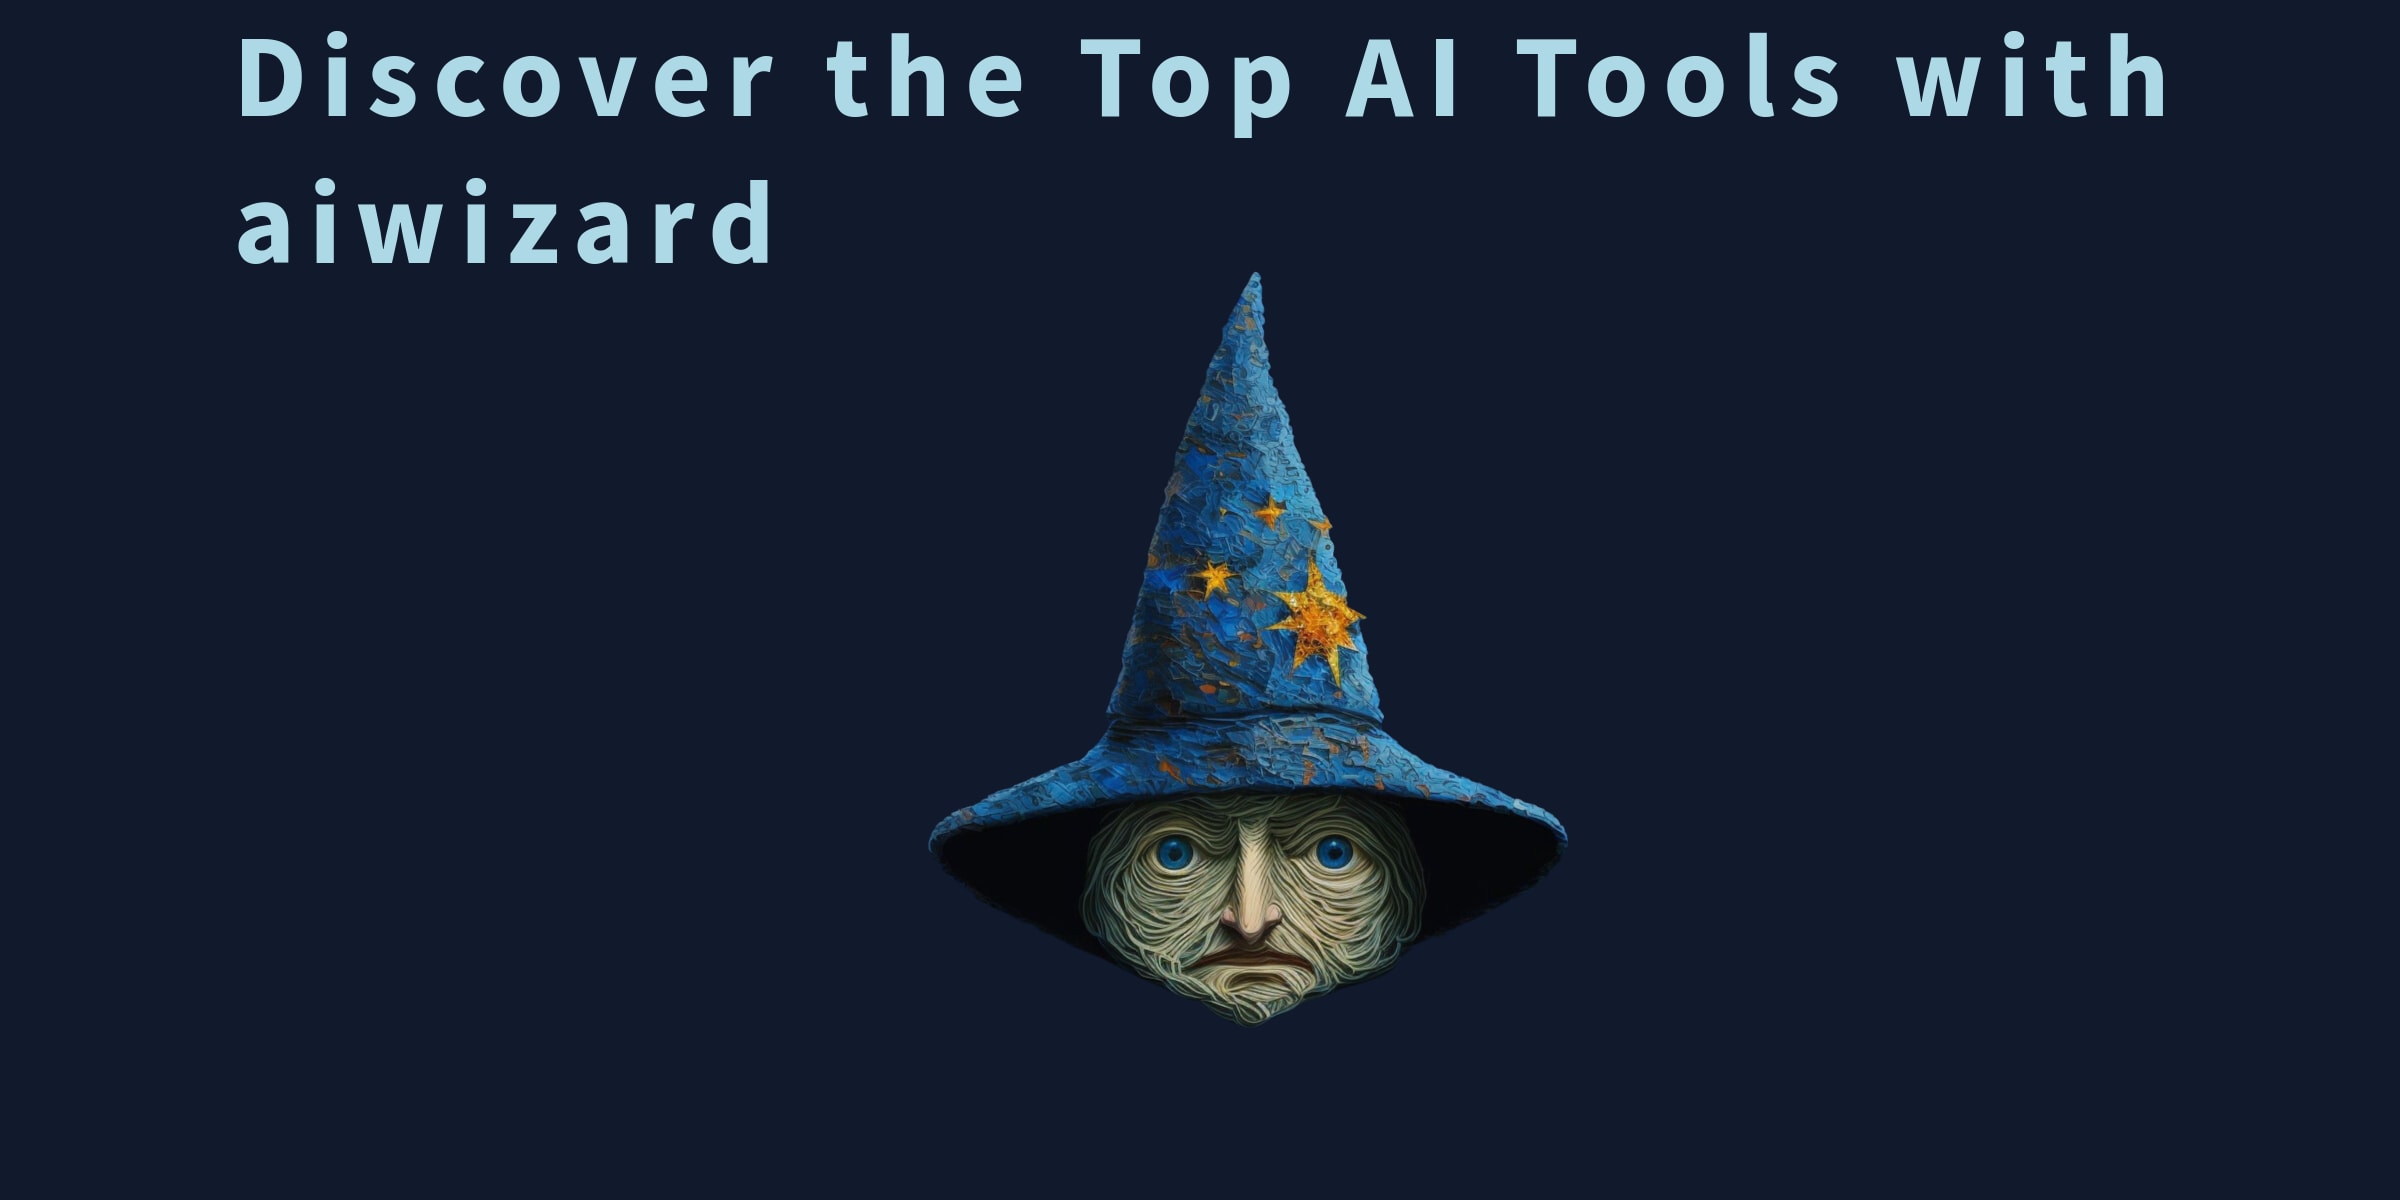 AIWizard - A platform for discovering AI tools